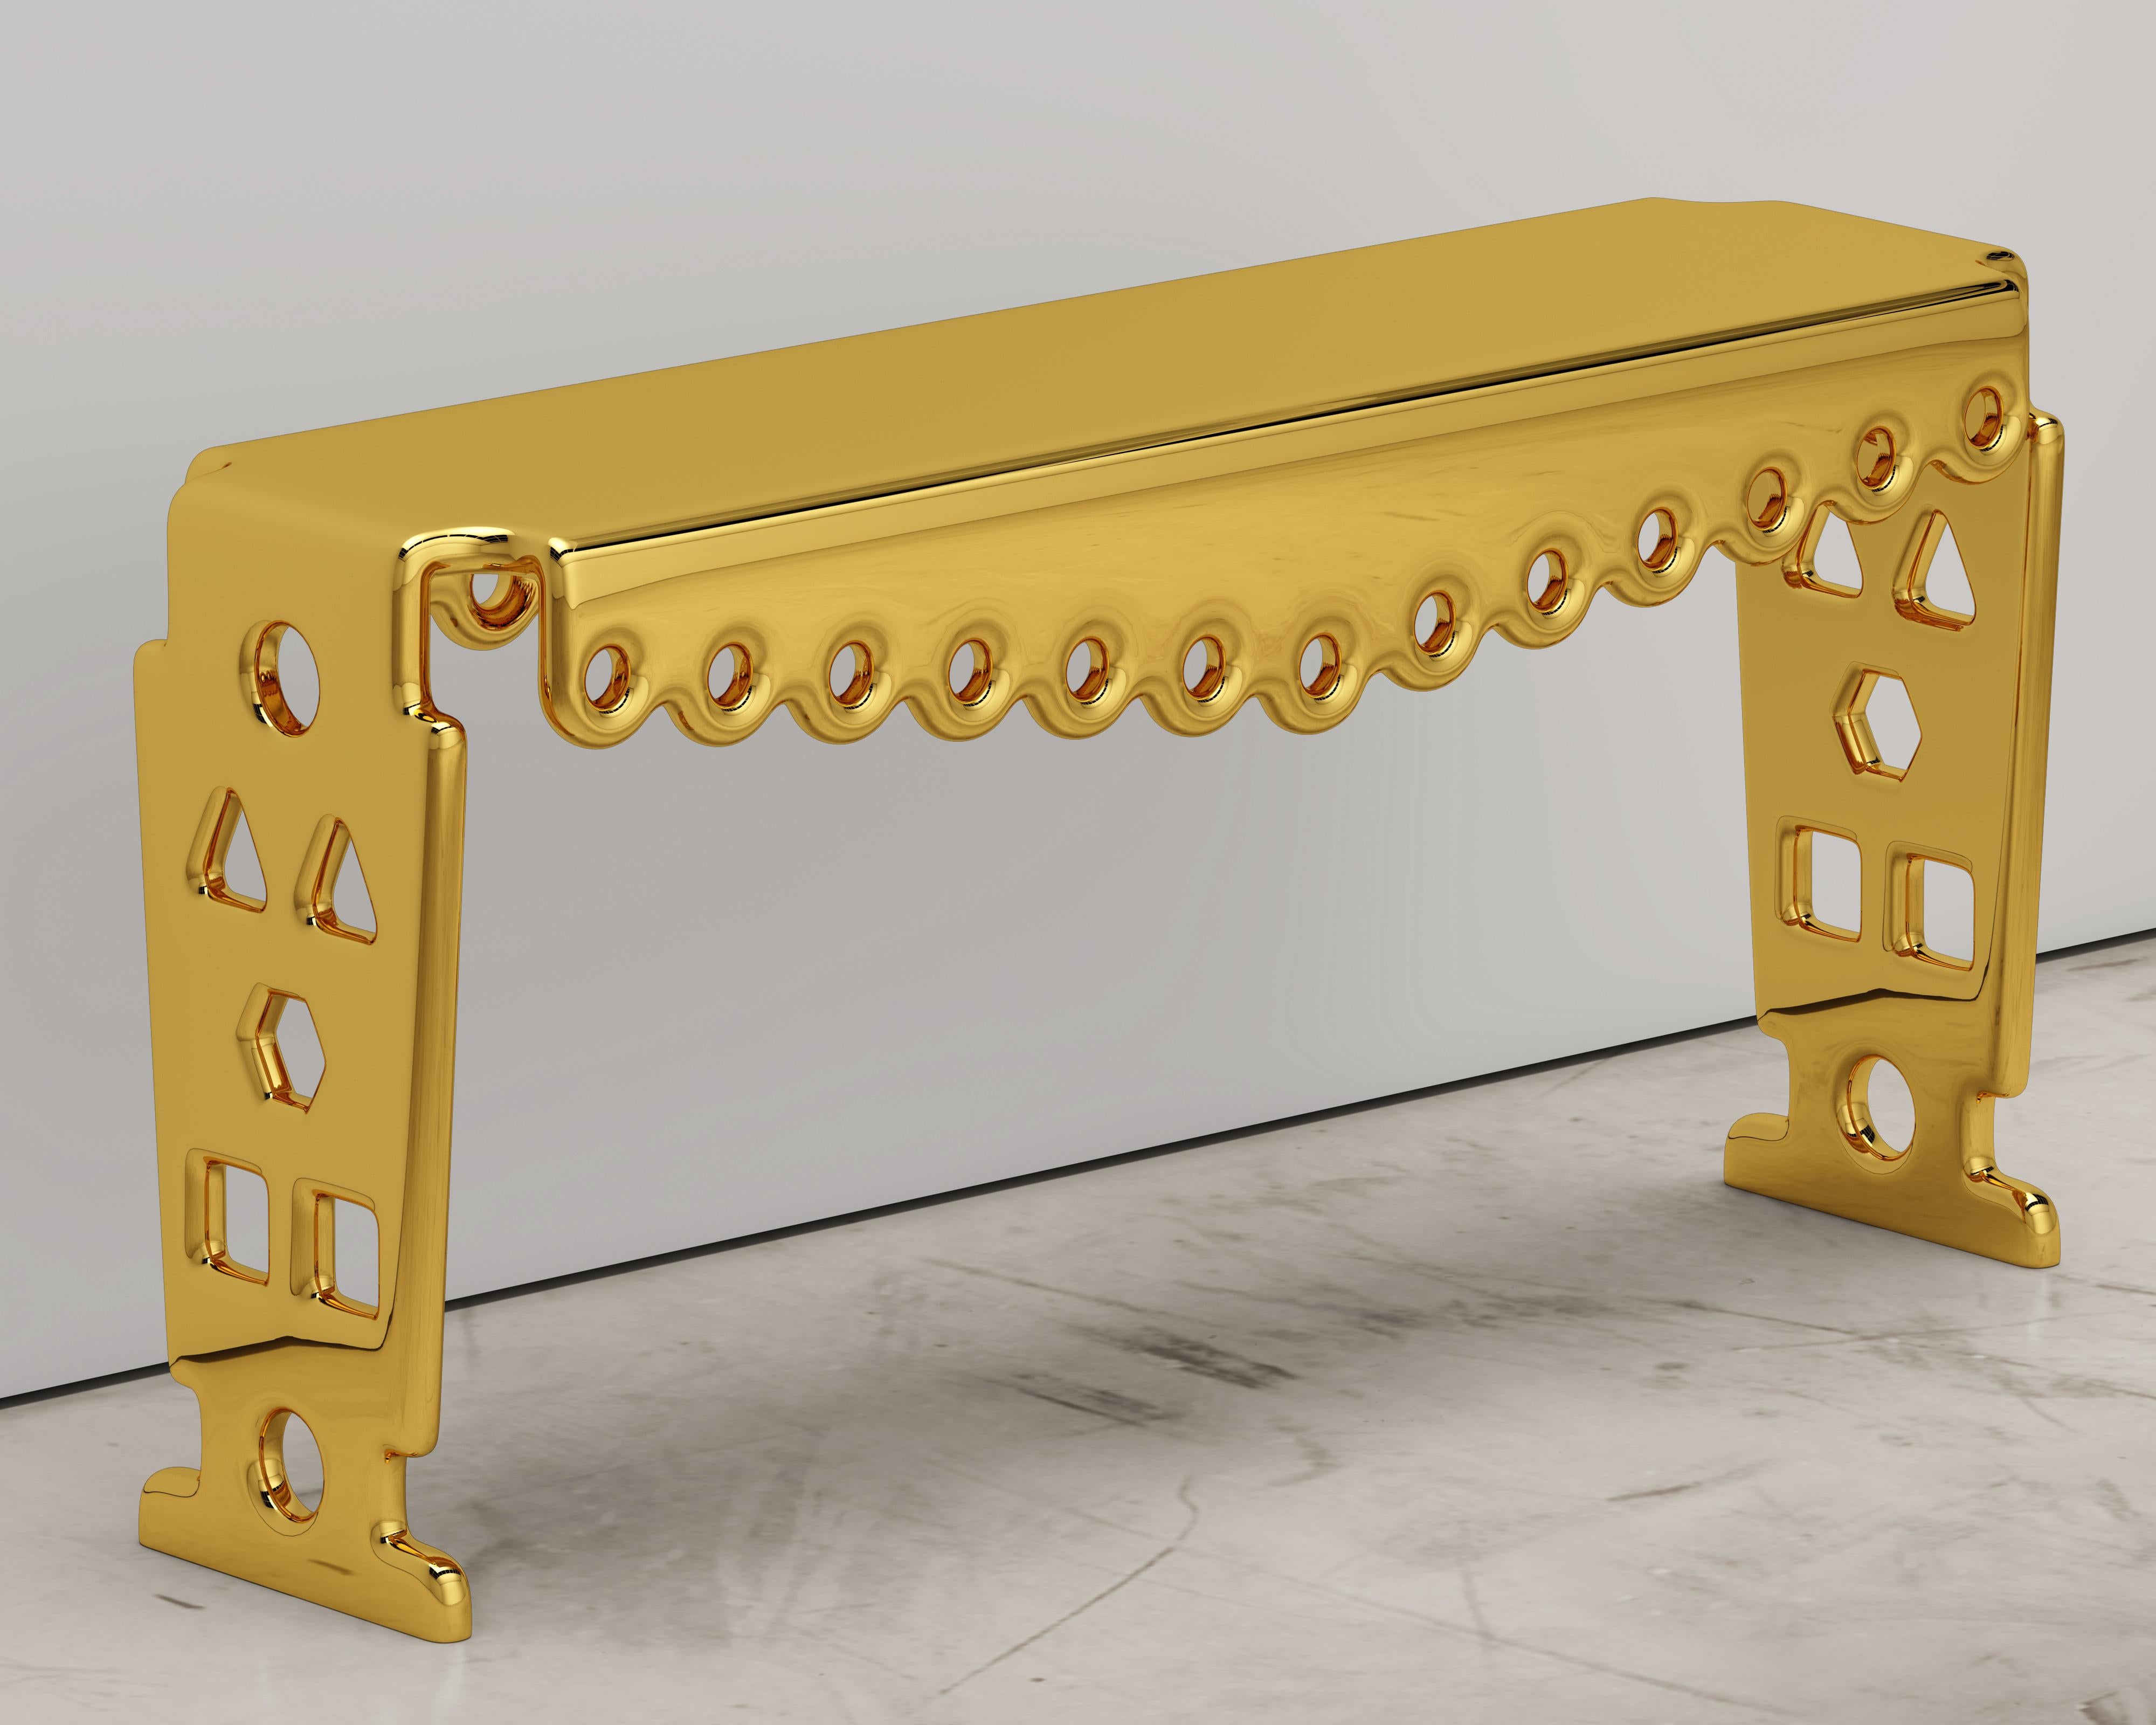 Contemporary console with mirror polished brass finish. You can see the past and present in the scale and proportions of the work, mixing classical form with today's modern style. Entirely made out of solid sheet metal and sculpted into shape by